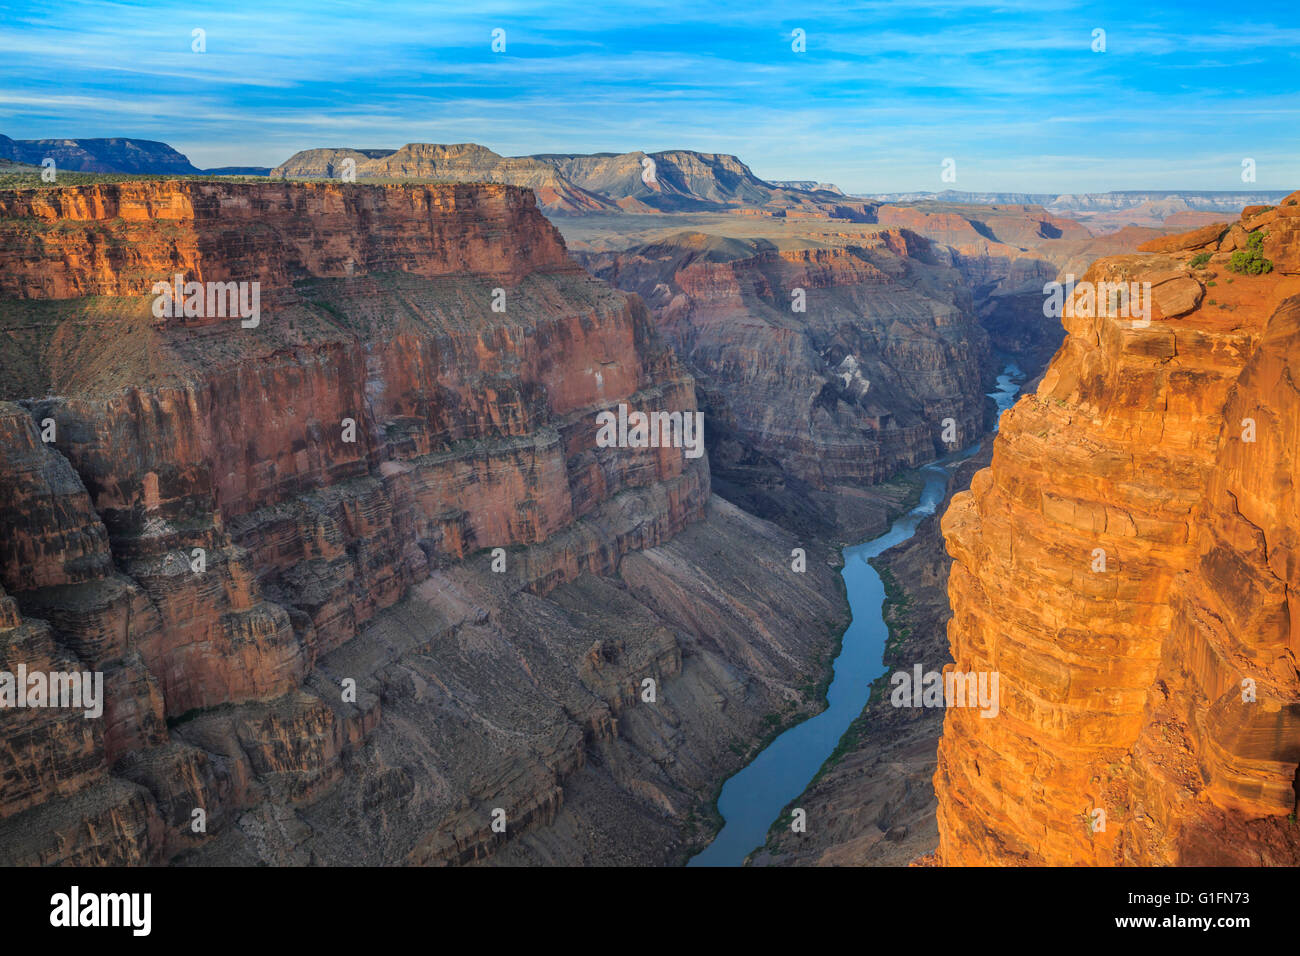 colorado river at lava falls rapids viewed from toroweap overlook in grand canyon national park, arizona Stock Photo